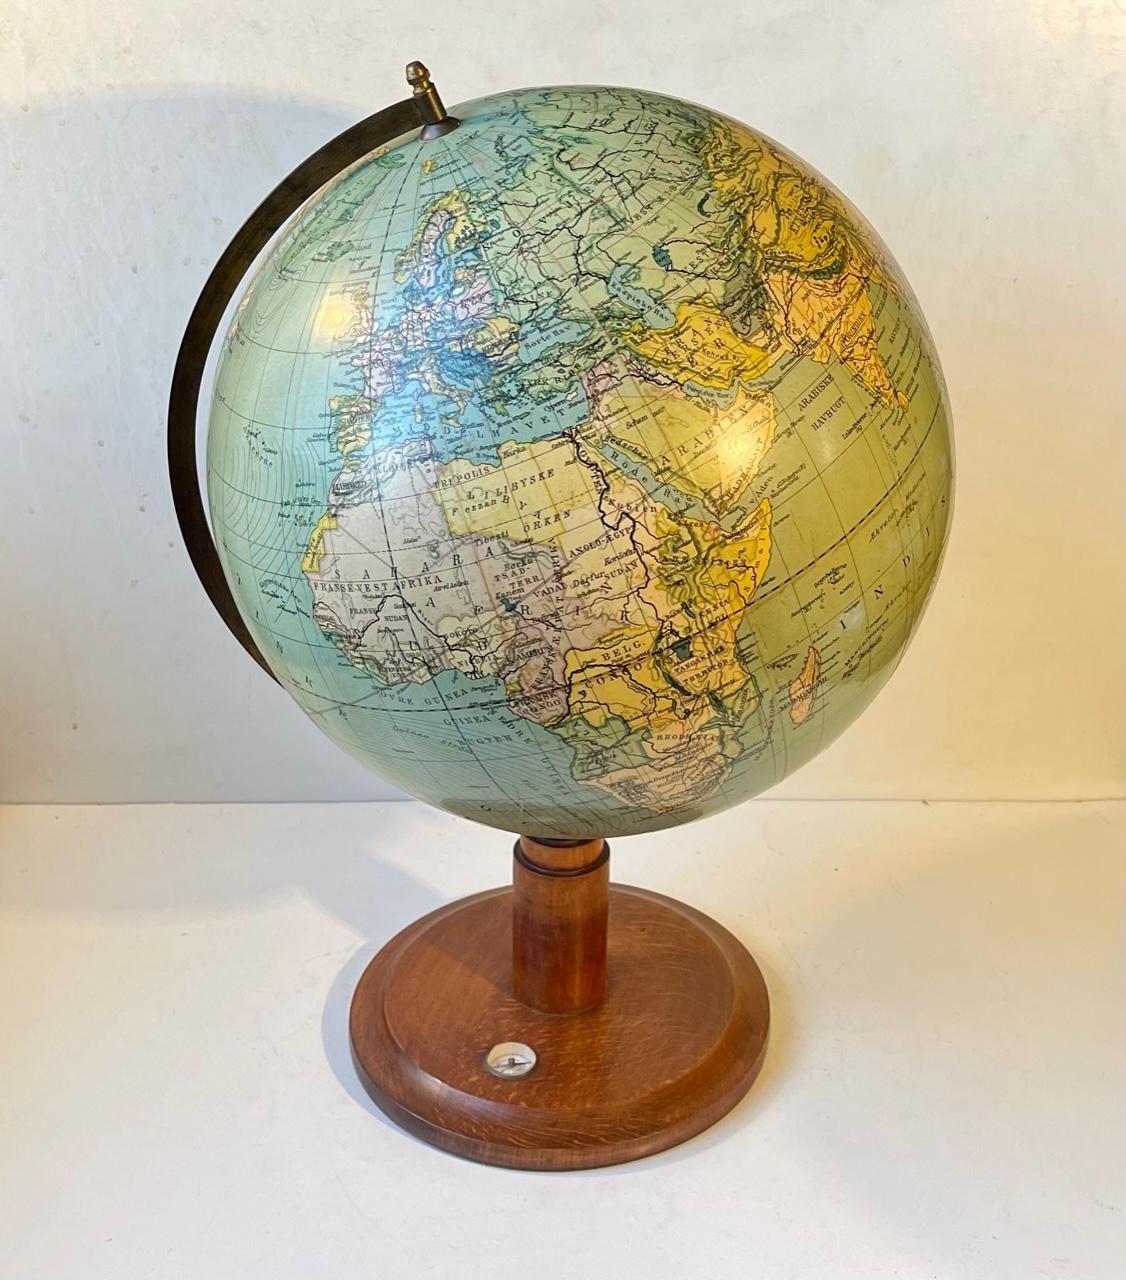 Danish Art Deco World Globe with Compass on a Wooden Base, Heimdal No. 34 In Good Condition For Sale In Esbjerg, DK